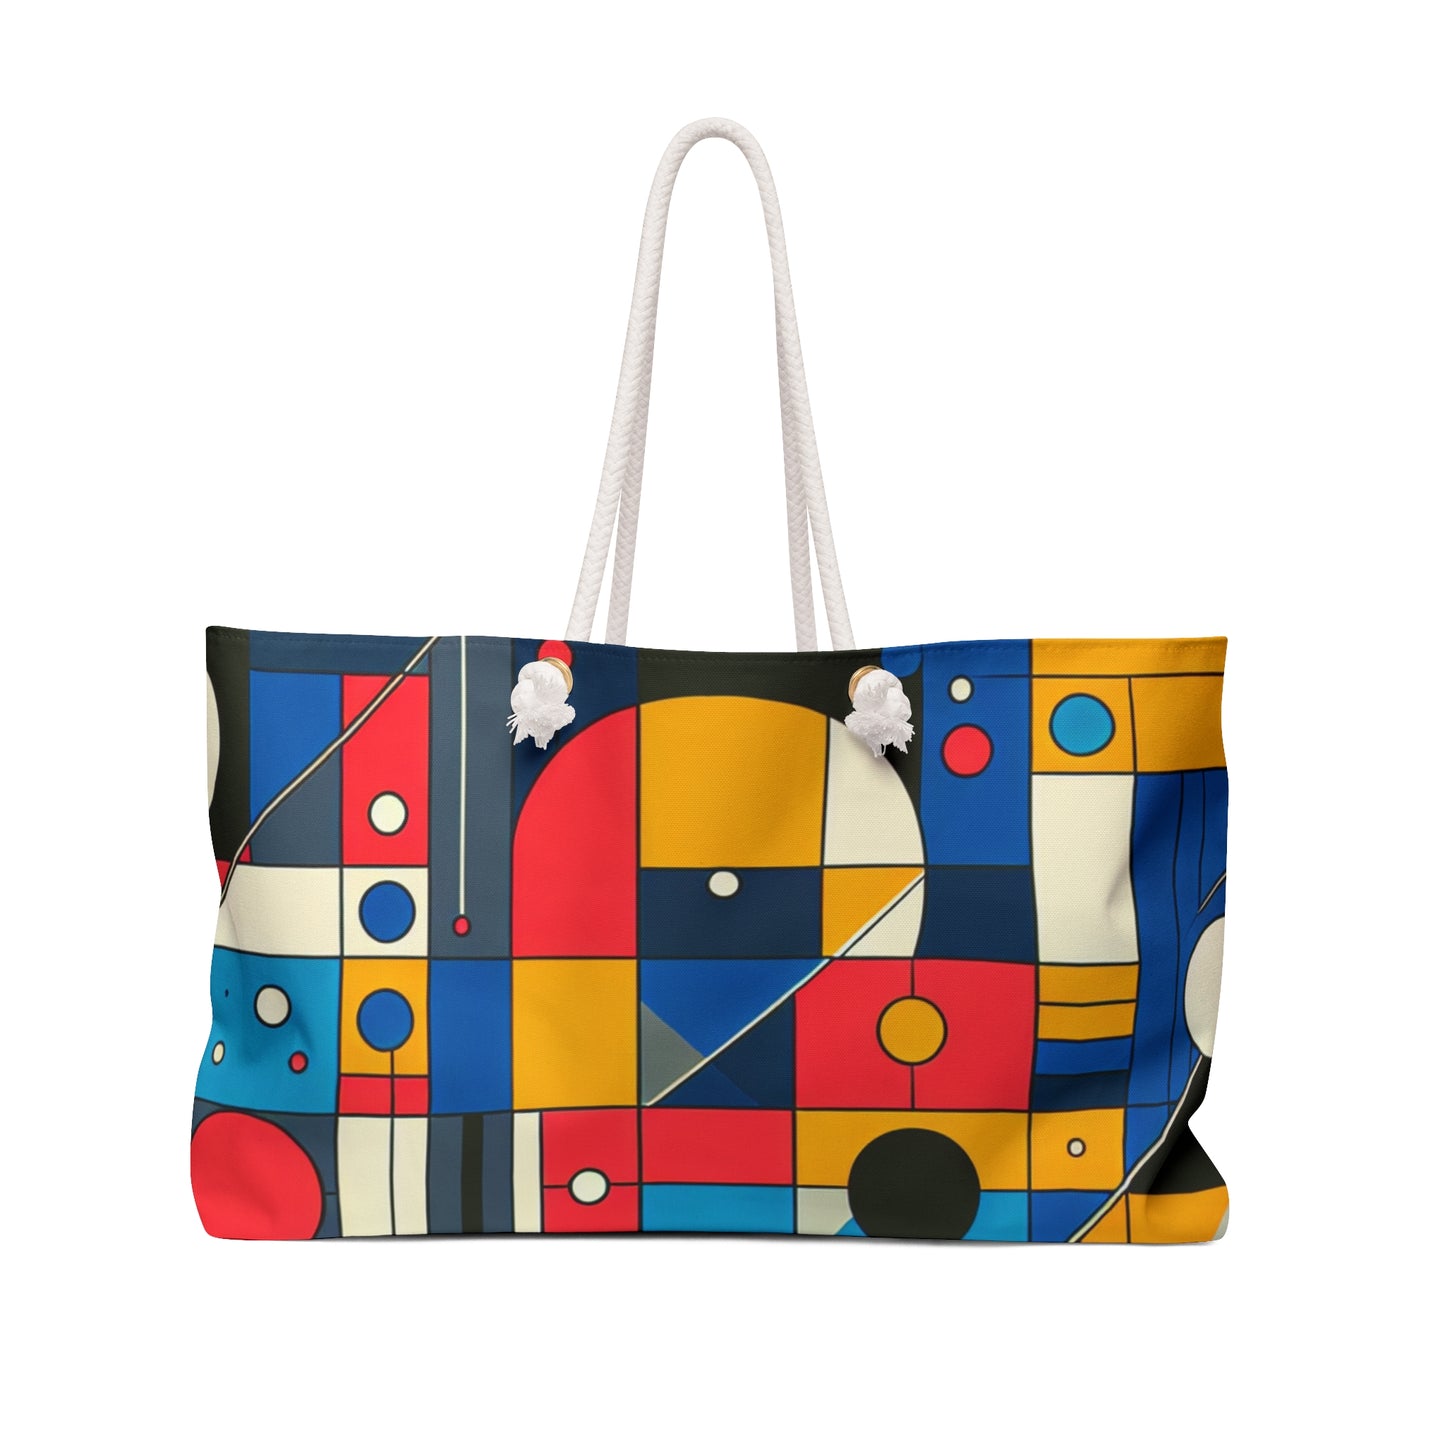 "Harmony in Nature: Geometric Abstraction" - The Alien Weekender Bag Geometric Abstraction